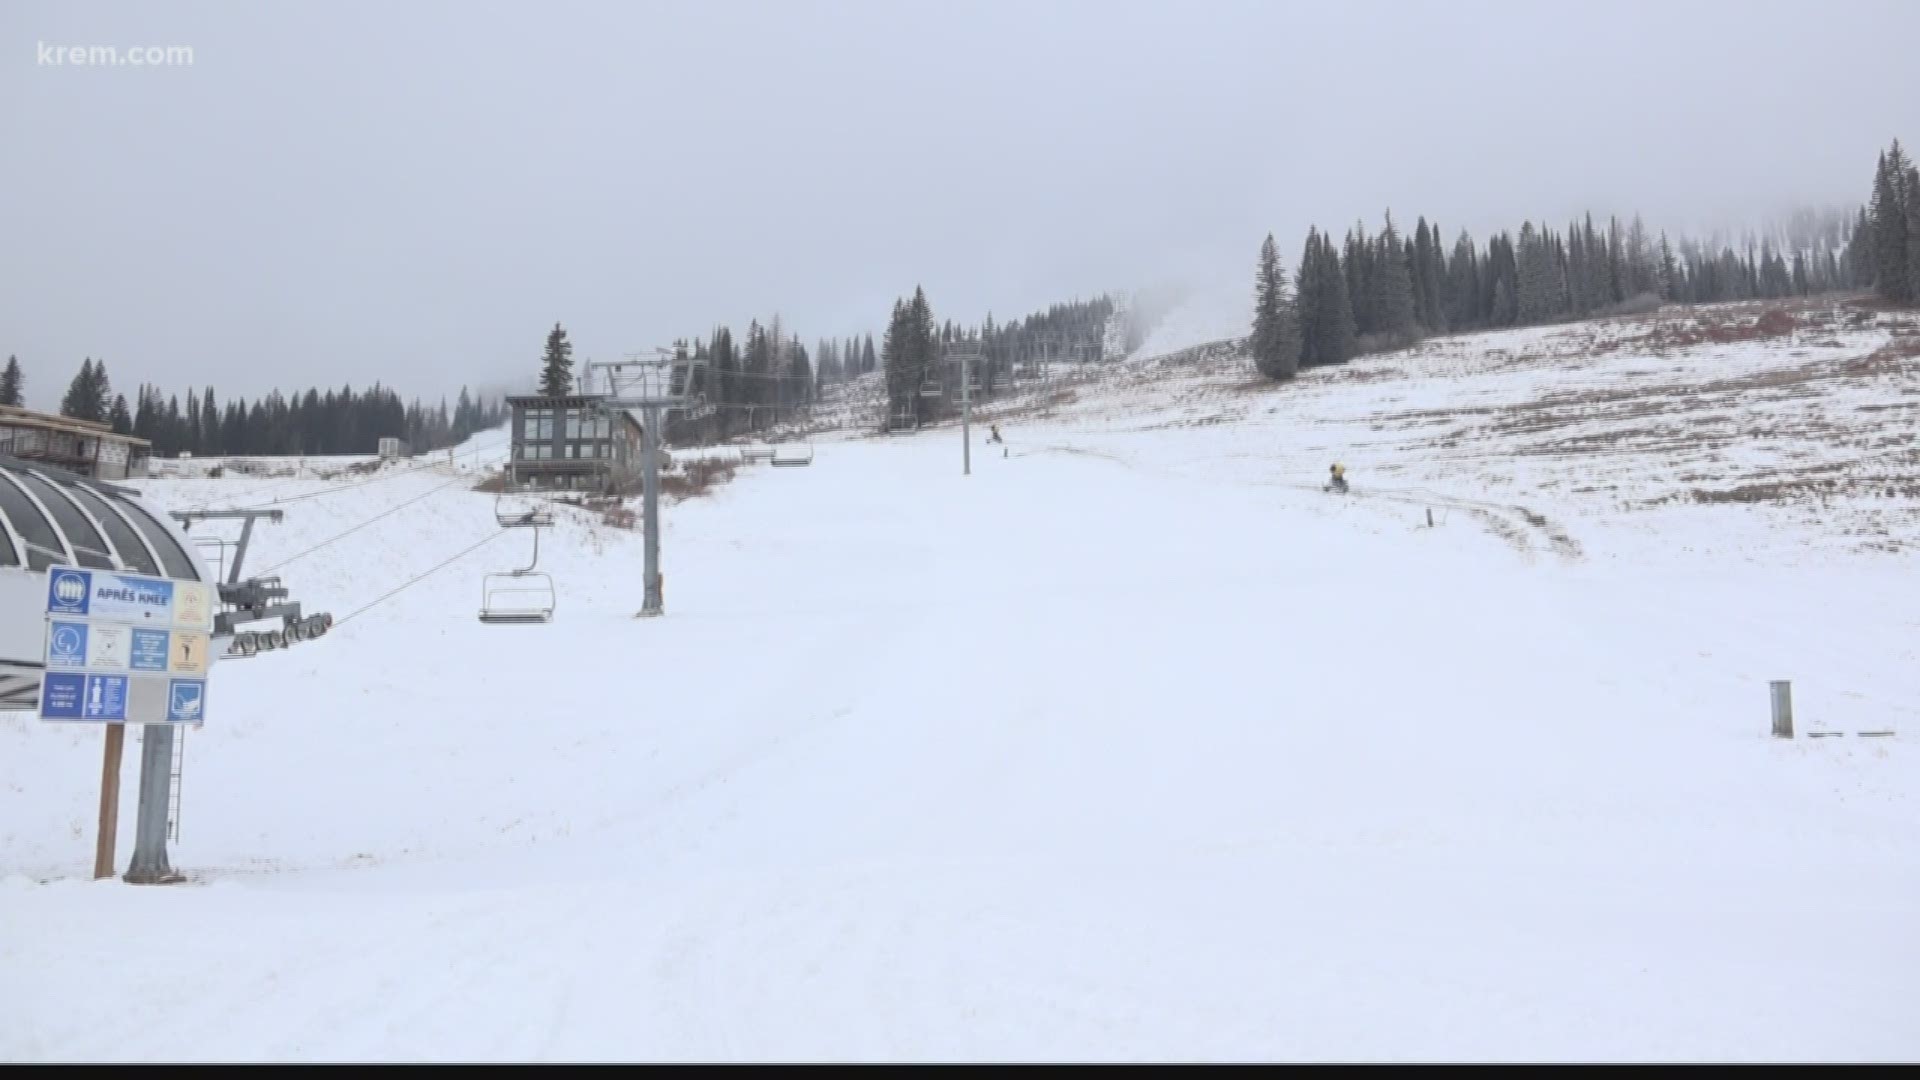 Local ski areas, such as Schweitzer, Lookout Pass and Mt. Spokane, are opening soon as snow has blanketed the mountains.